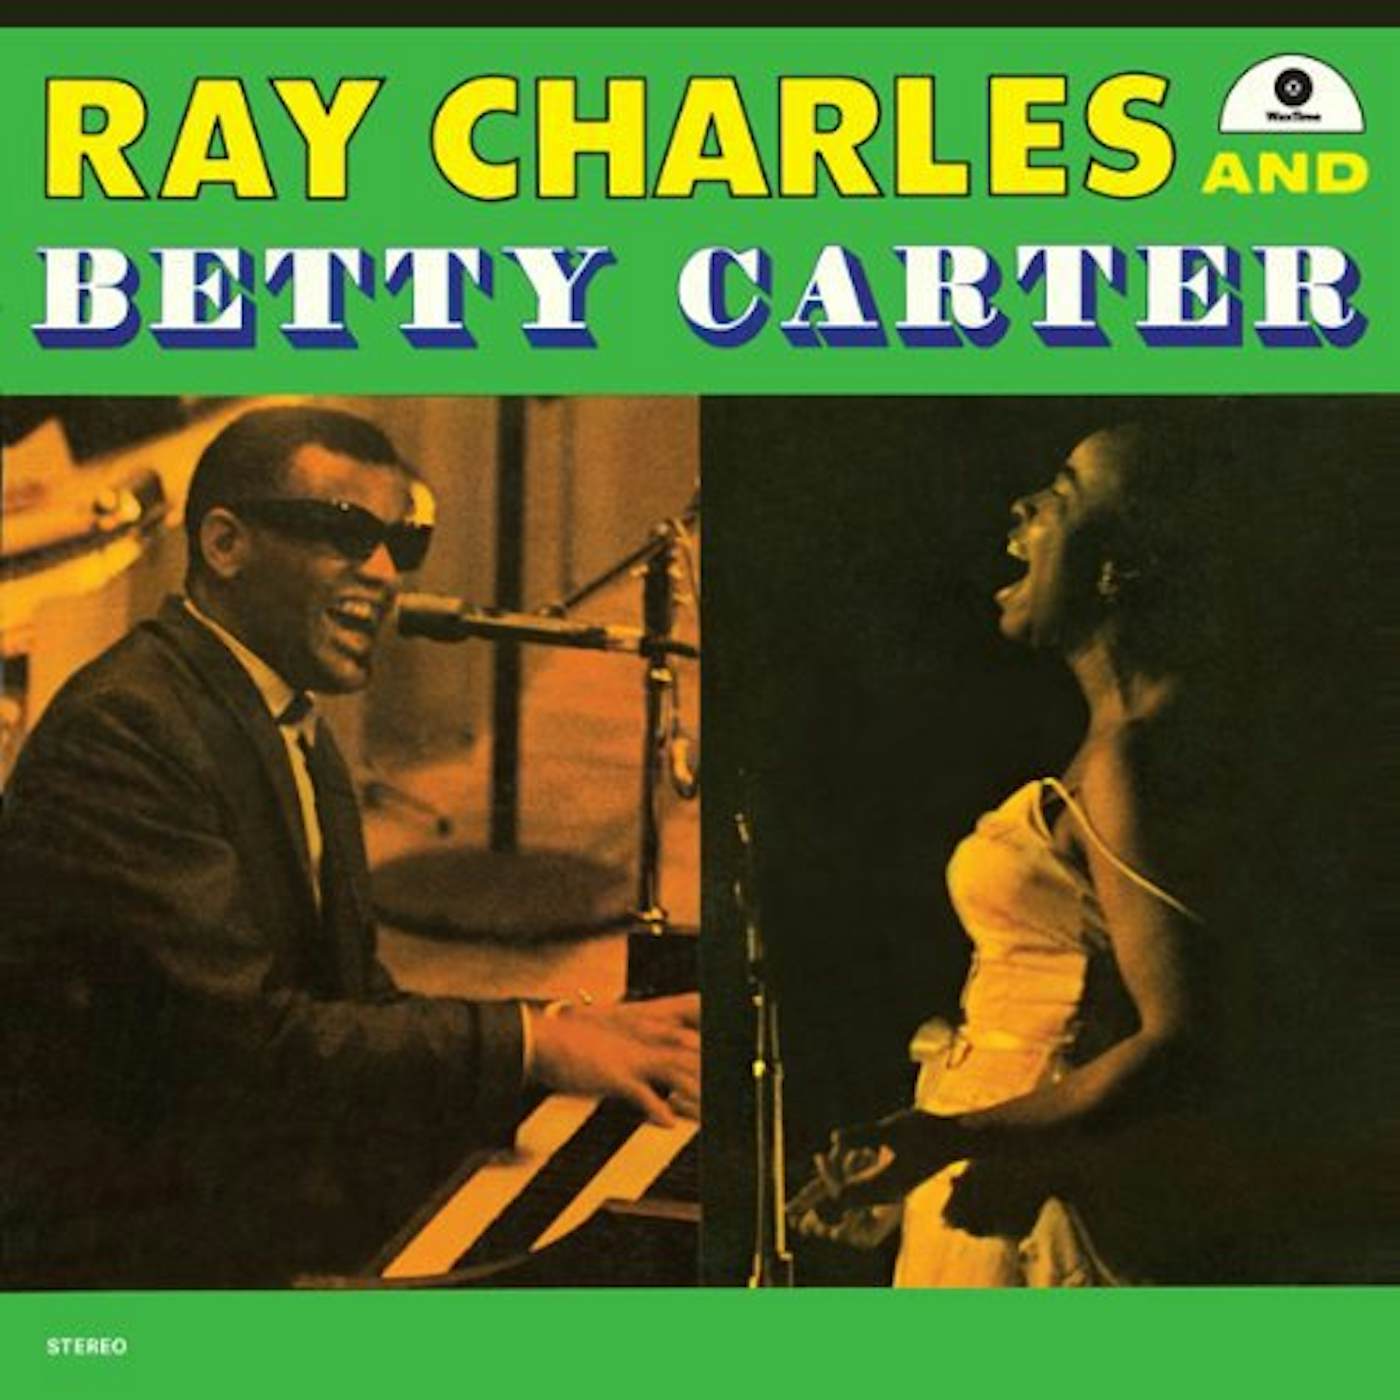 RAY CHARLES & BETTY CARTER Vinyl Record - Spain Release